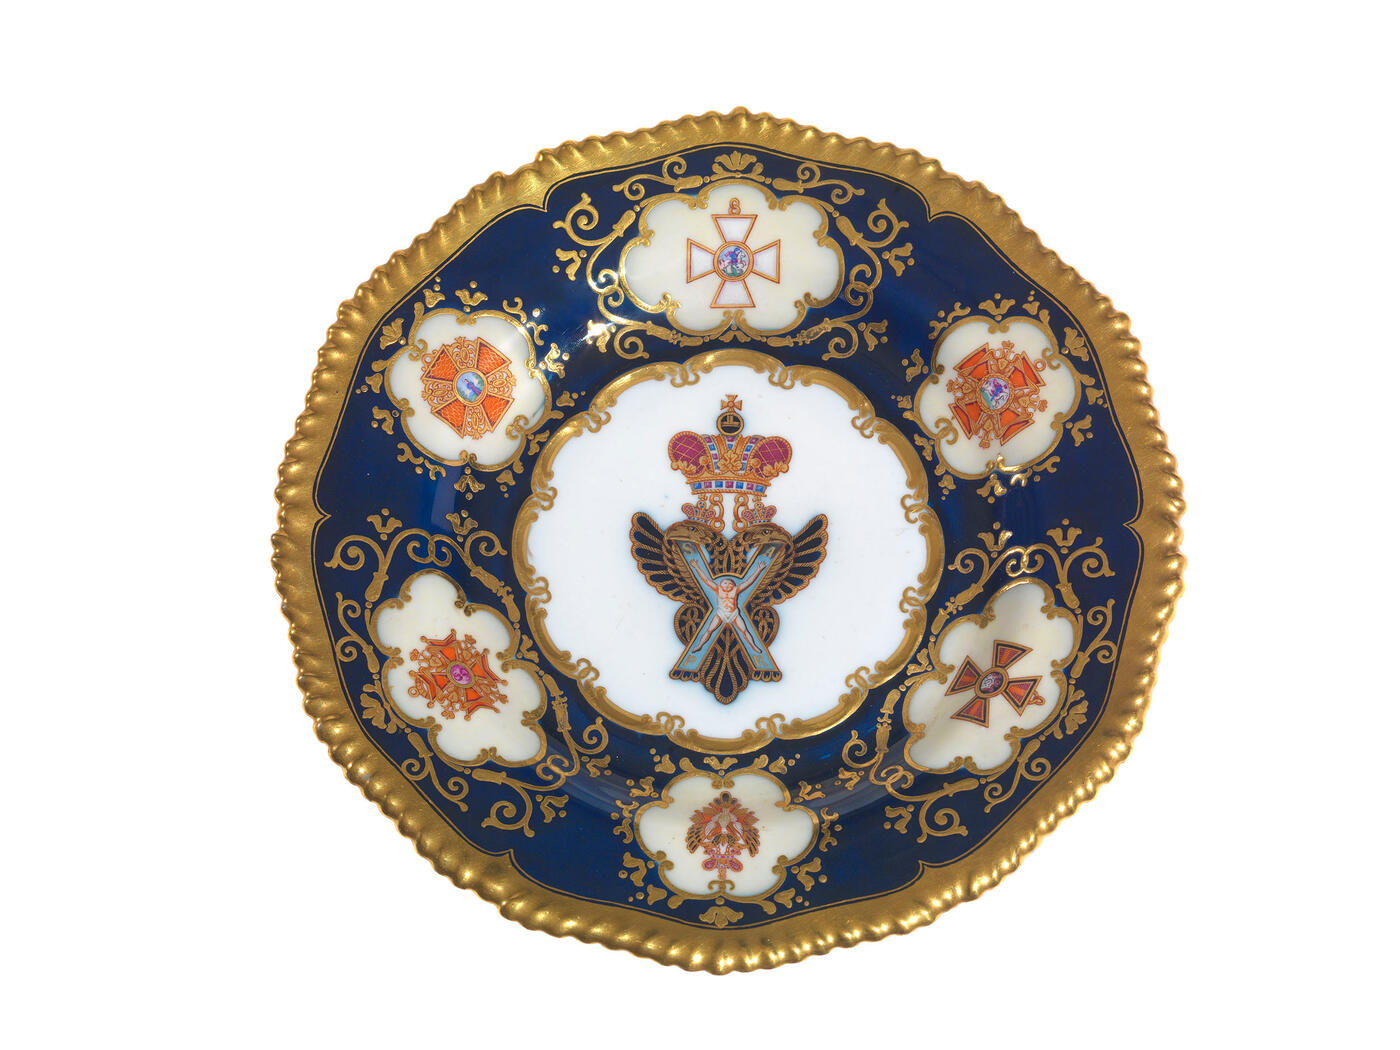 <br/>IMPERIAL PORCELAIN MANUFACTORY, PERIOD OF NICHOLAS I (1825–1855)